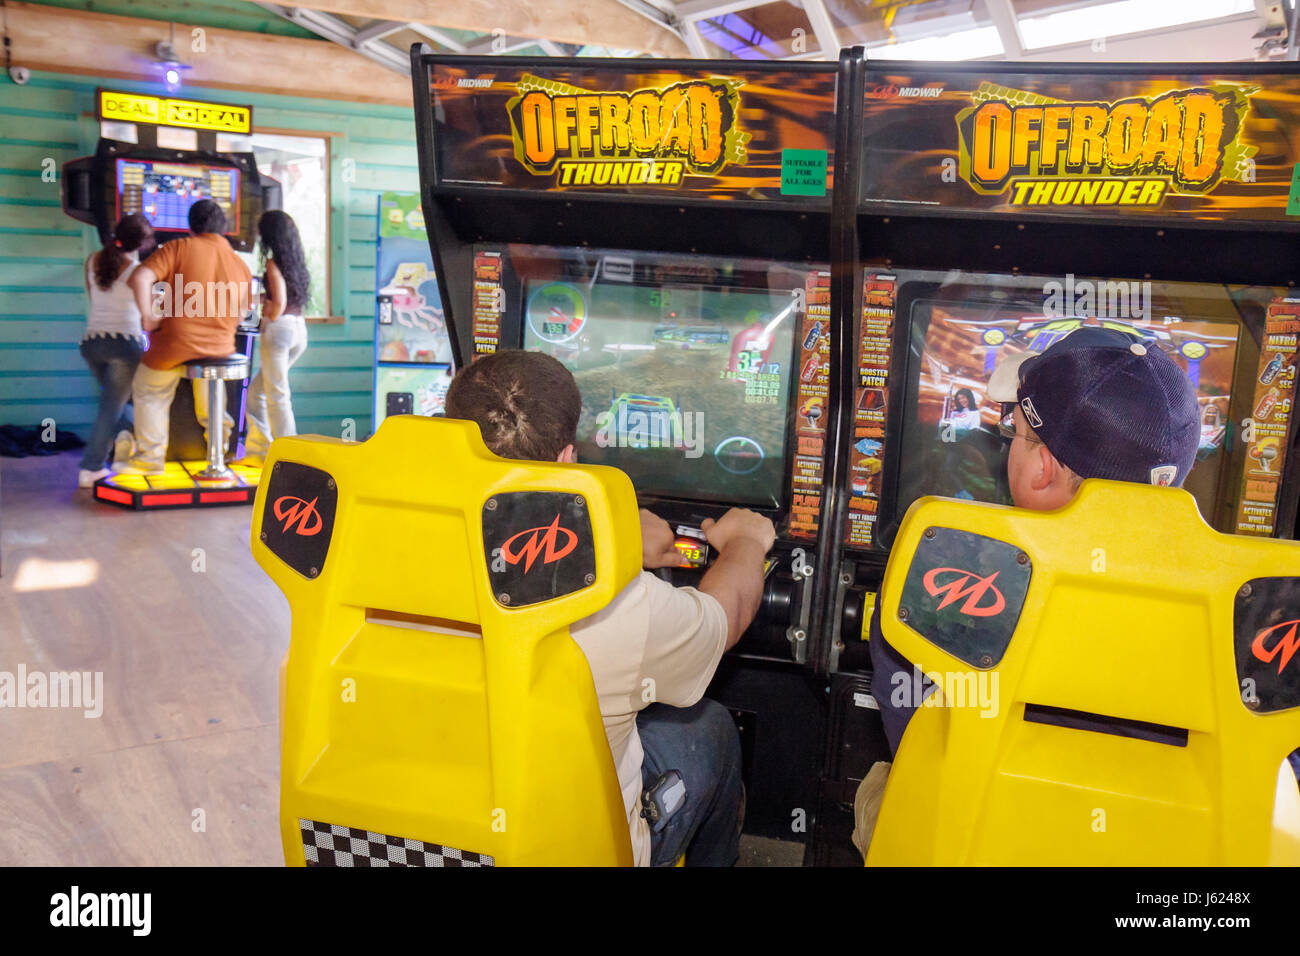 Valparaiso Indiana,Zao Island Entertainment Center,centre,video game arcade,boy boys,male kid kids child children youngster,teen,teens,fun,Off road Of Stock Photo